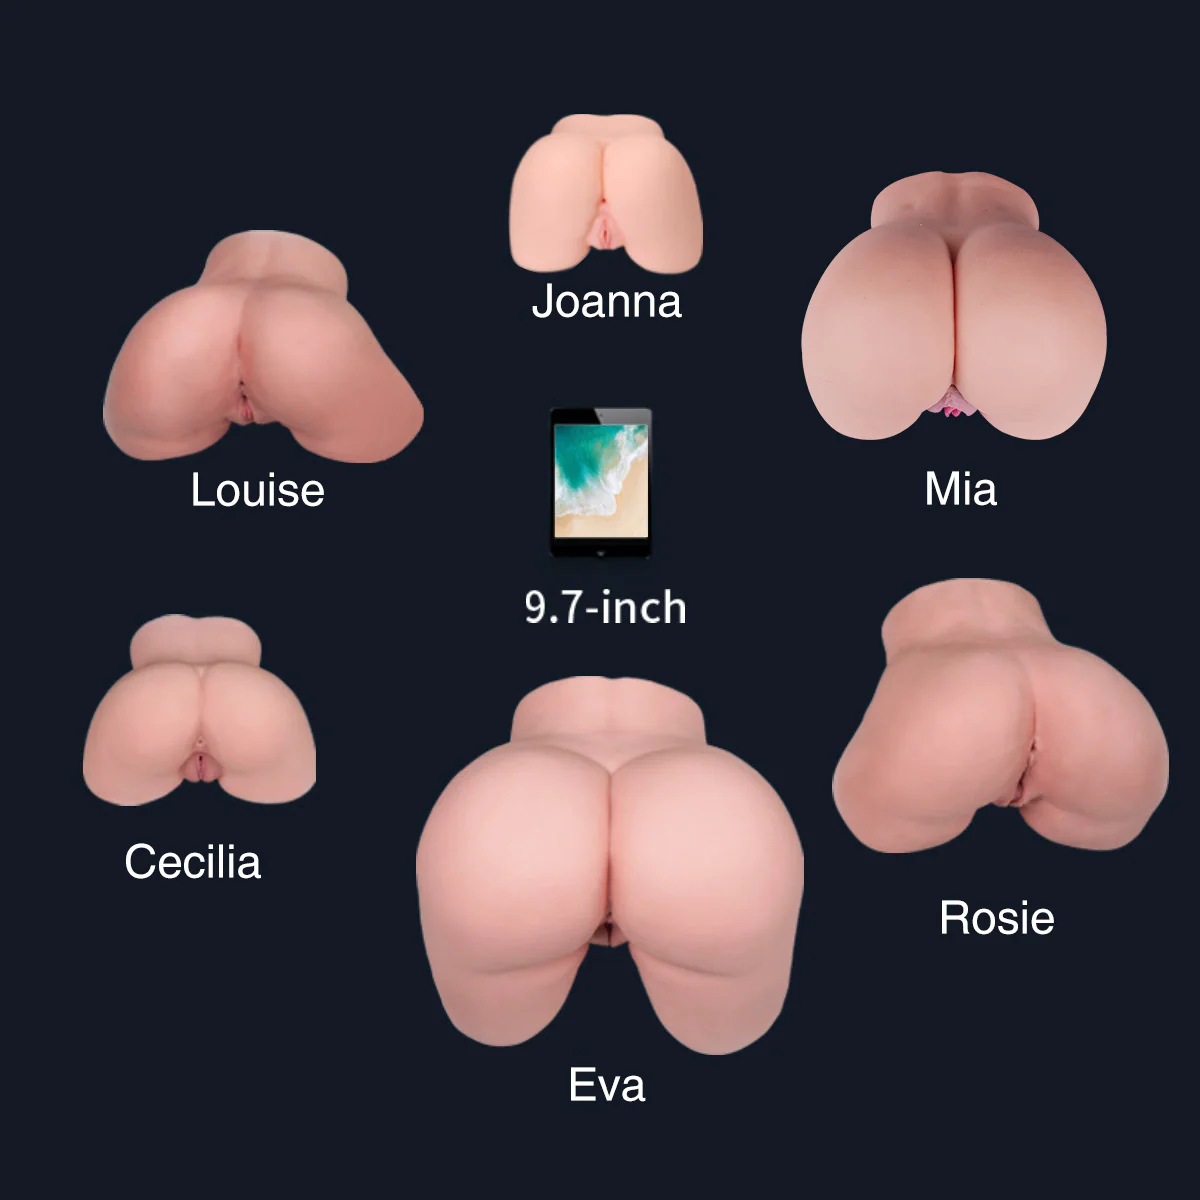 An image showing the different sex doll models to find the perfect Tantaly doll.